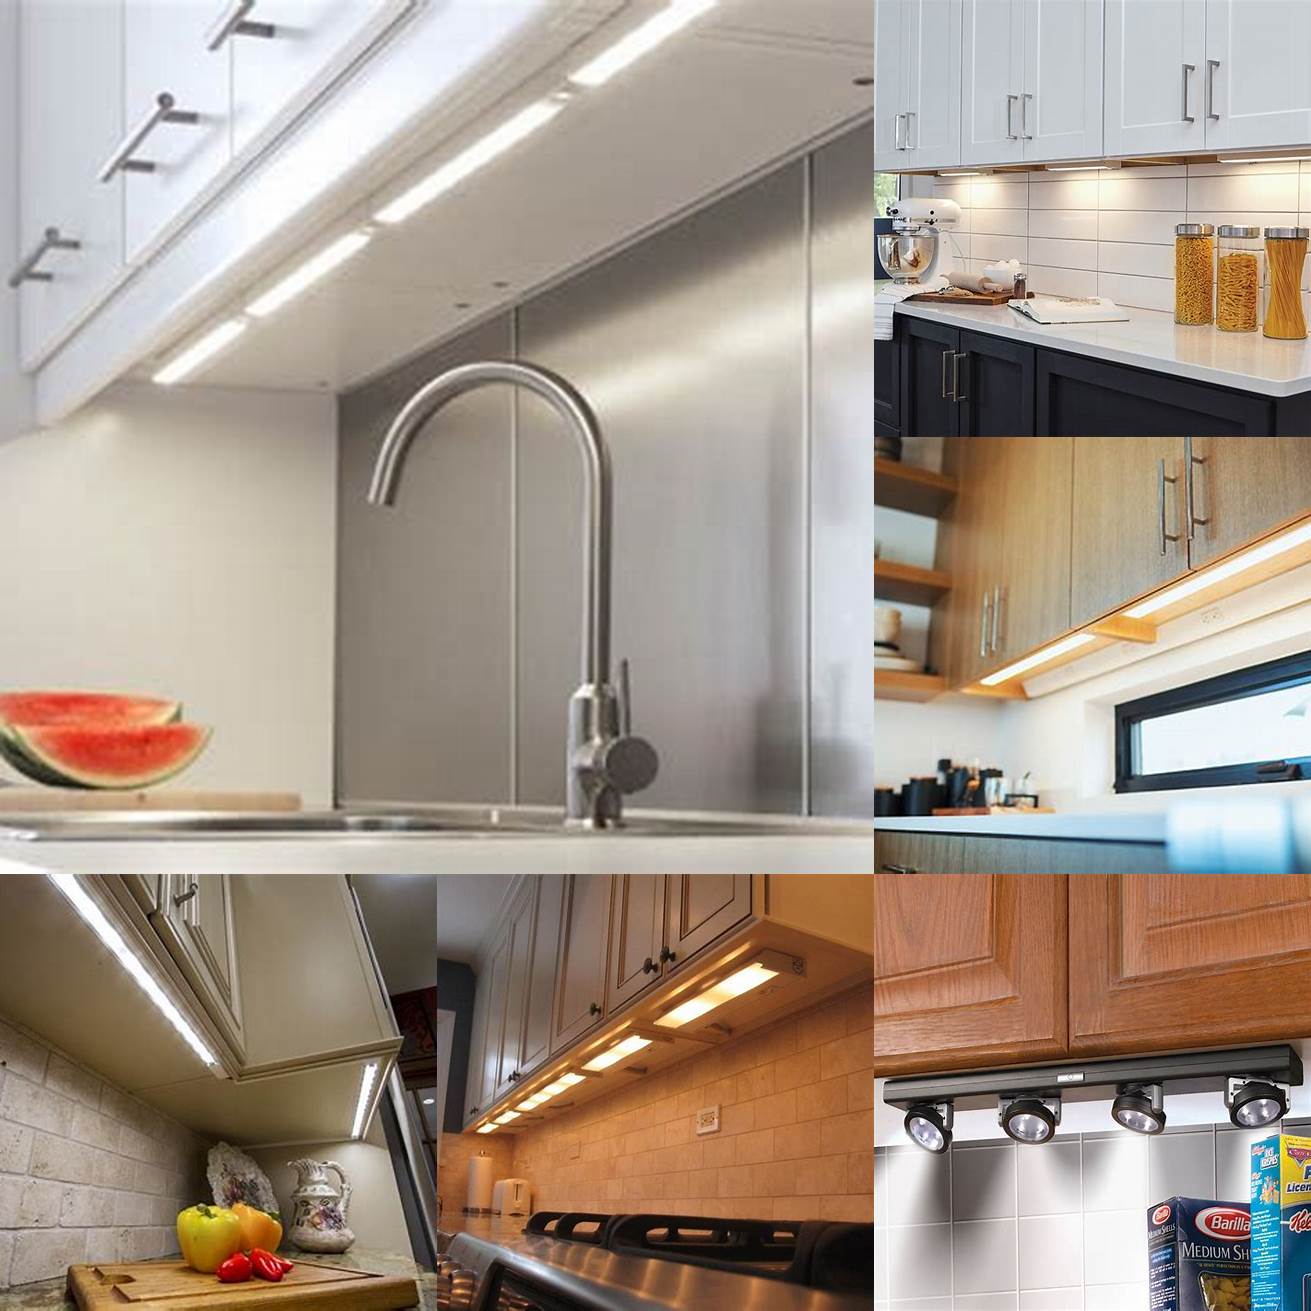 Under cabinet lighting provides task lighting for your countertops and is great for food prep and cooking